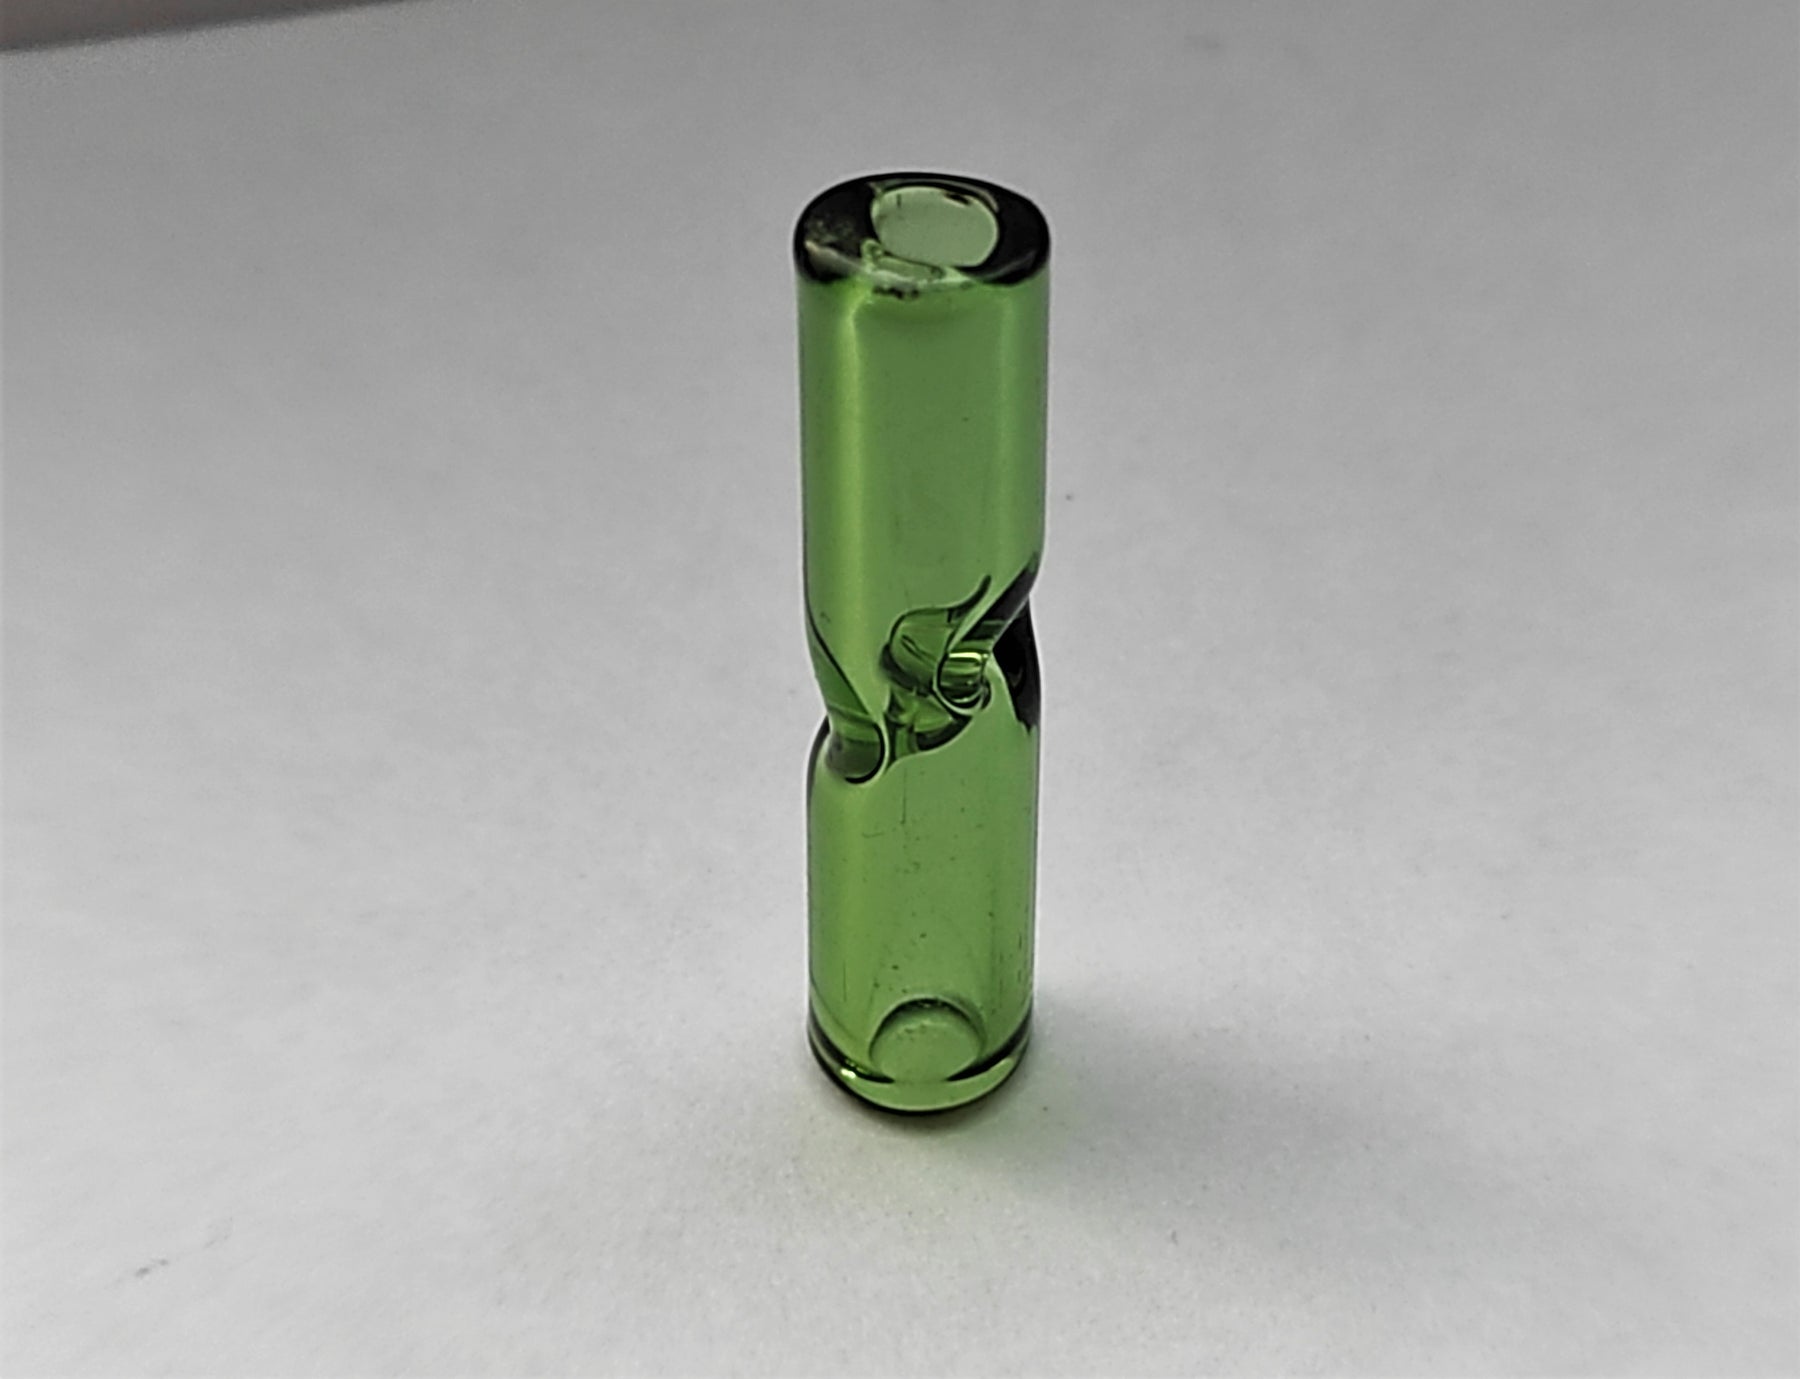 OutonTrip Re-useable Glass Filter Tip - Round Mouthpiece